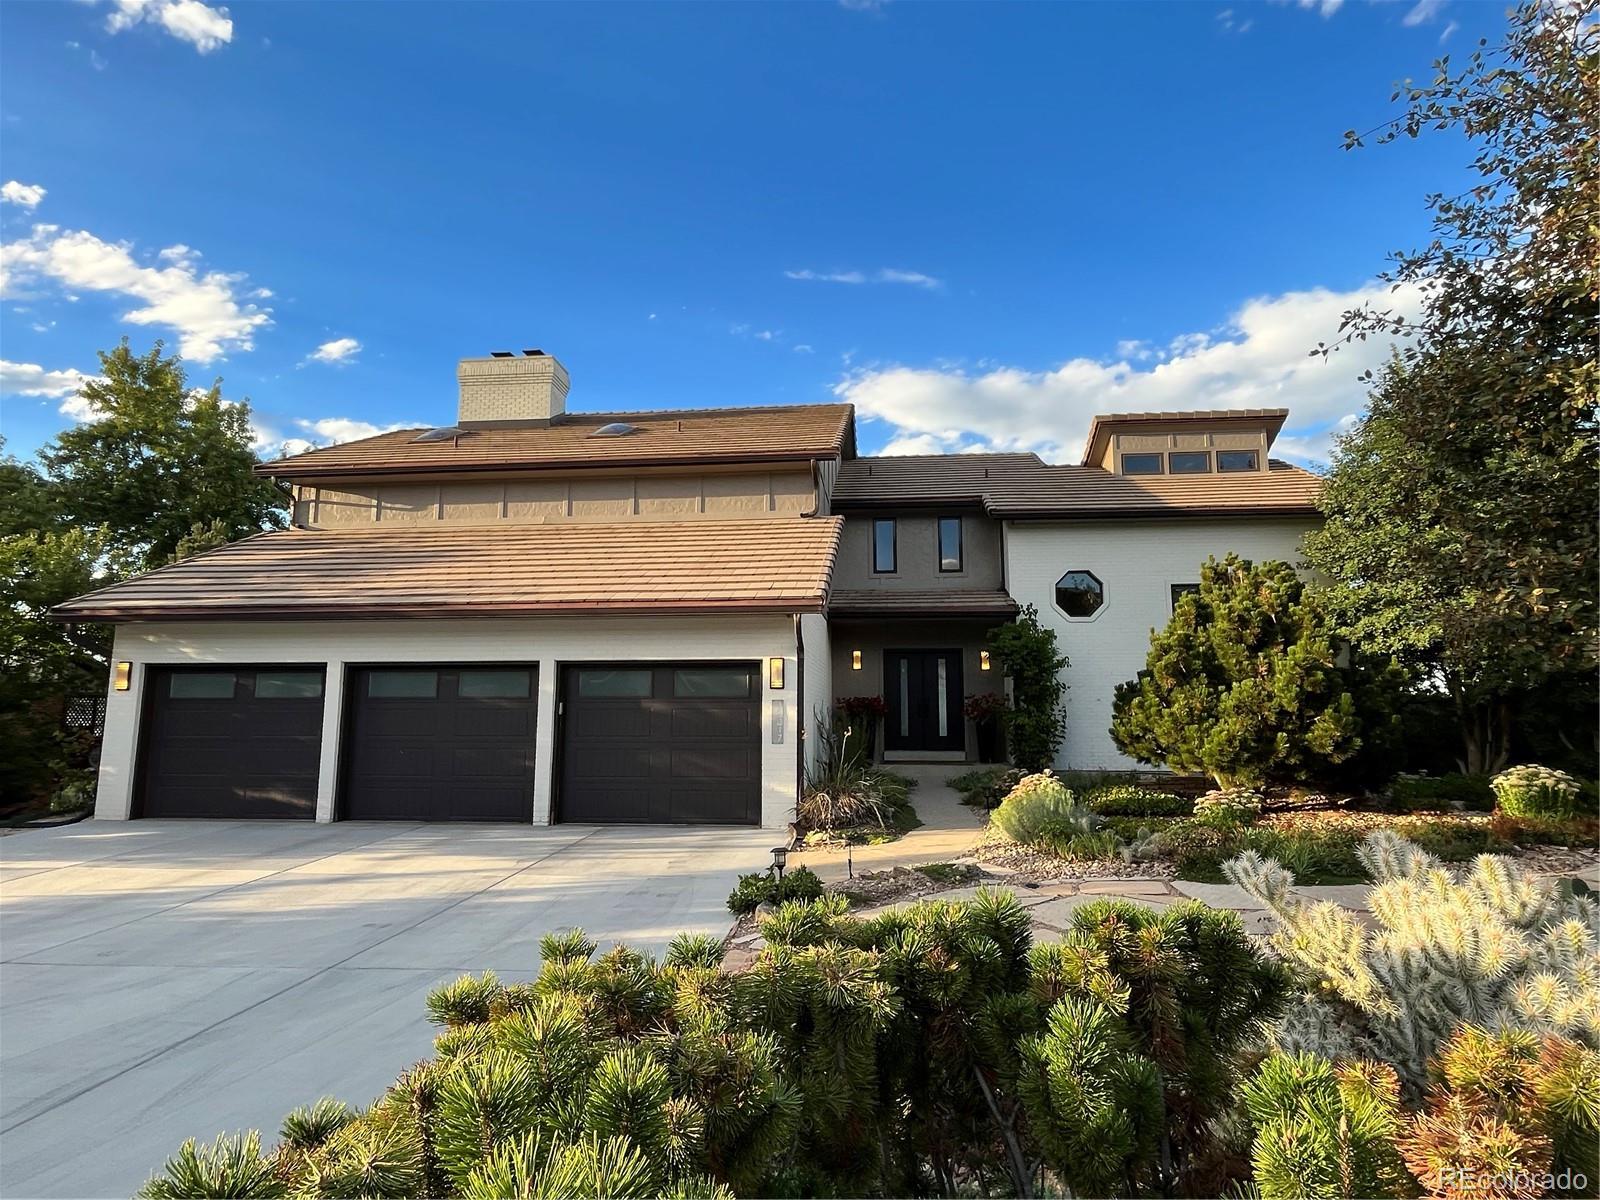 12017 W 54th Drive, arvada MLS: 2508978 Beds: 4 Baths: 4 Price: $1,325,000